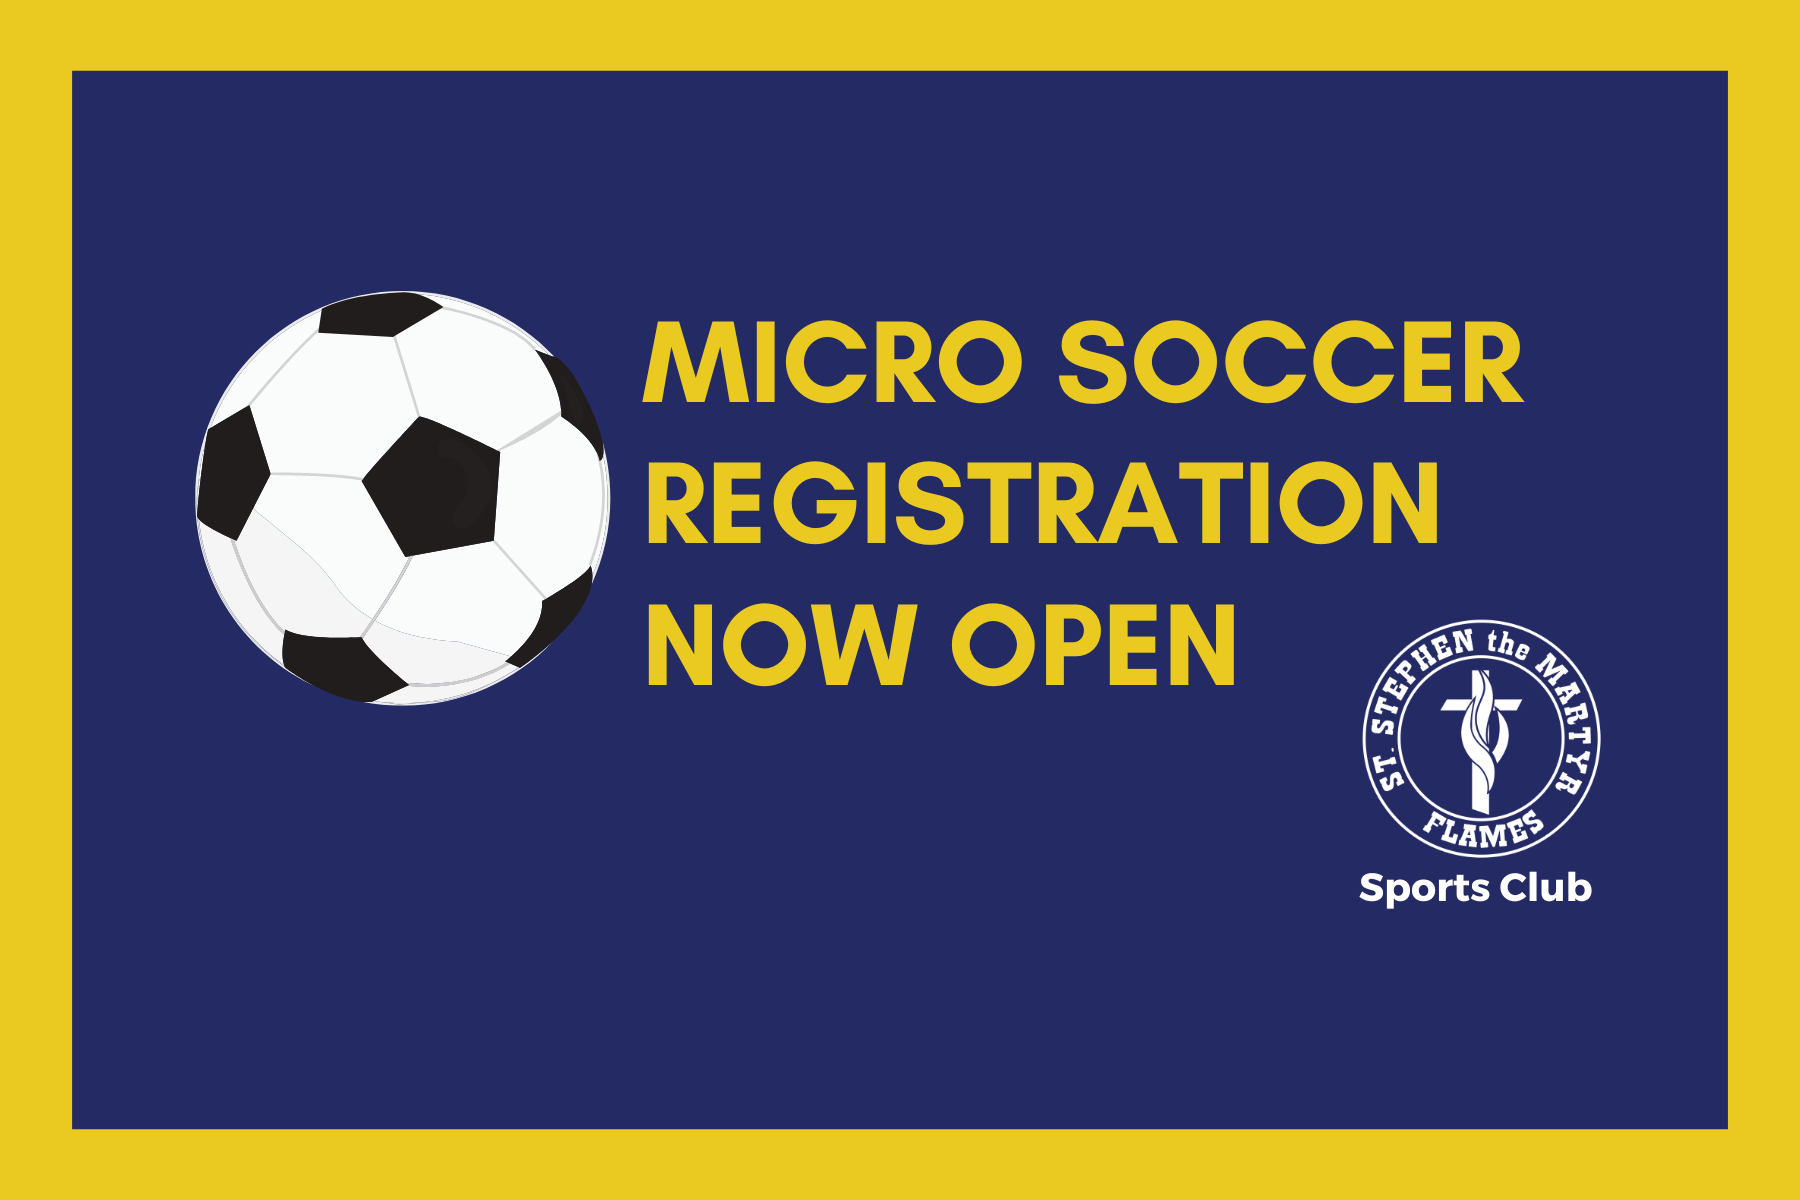 Micro Soccer Registration Now Open!